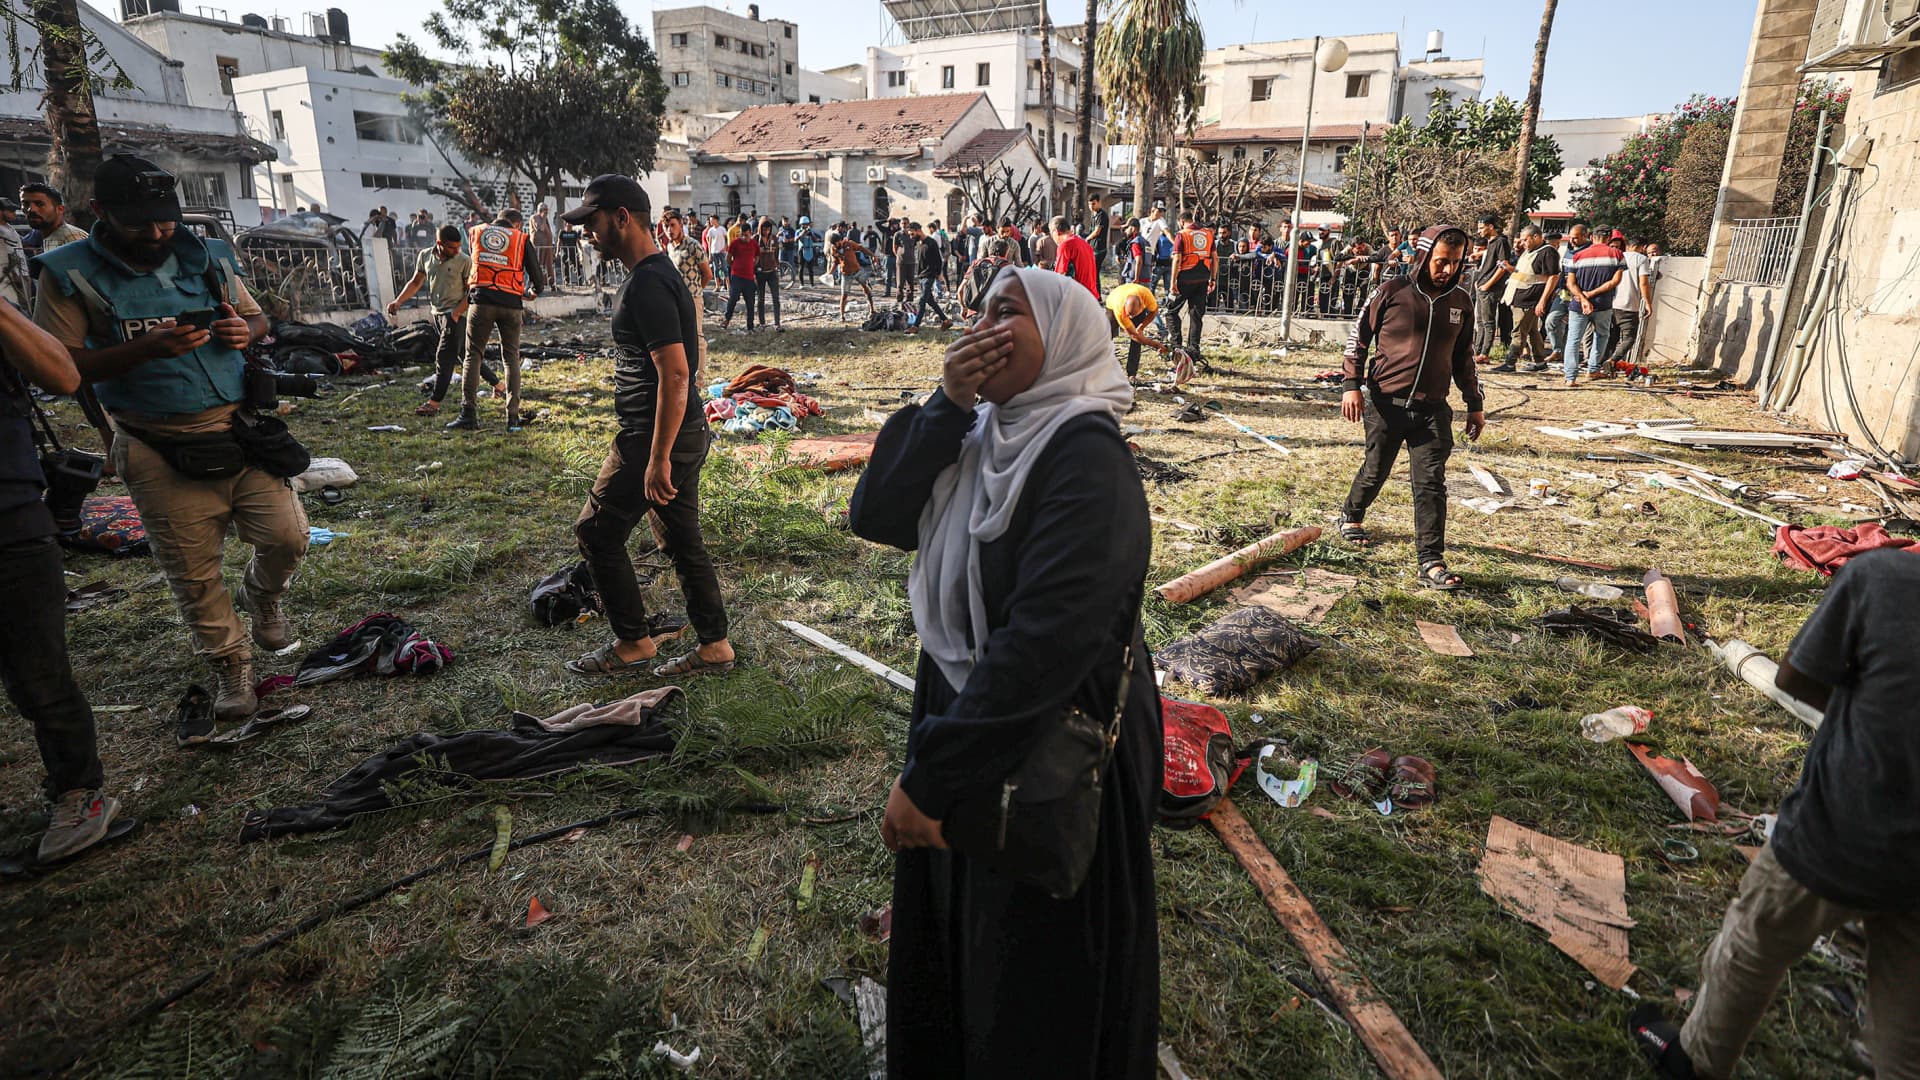 A Palestinian woman cries amid debris and the belongings of Palestinians in the garden of al-Ahli Arabi Baptist Hospital in Gaza City, Gaza, after hundreds of people were killed when the hospital was hit, Oct. 18, 2023.